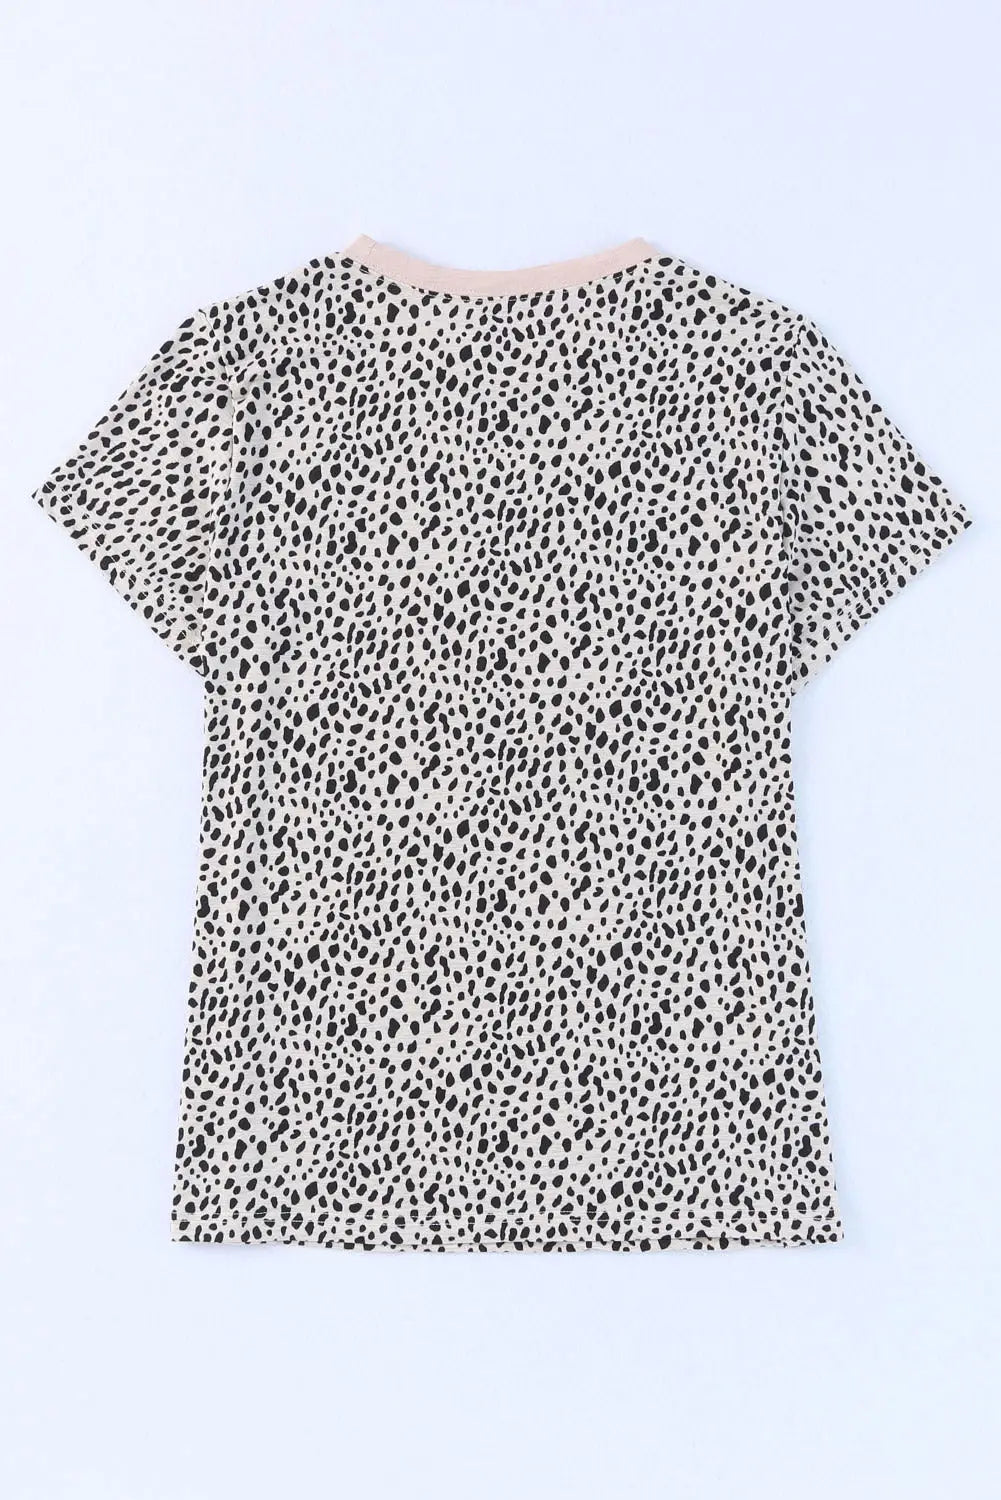 Animal Spotted Print Round Neck Long Sleeve Top-99